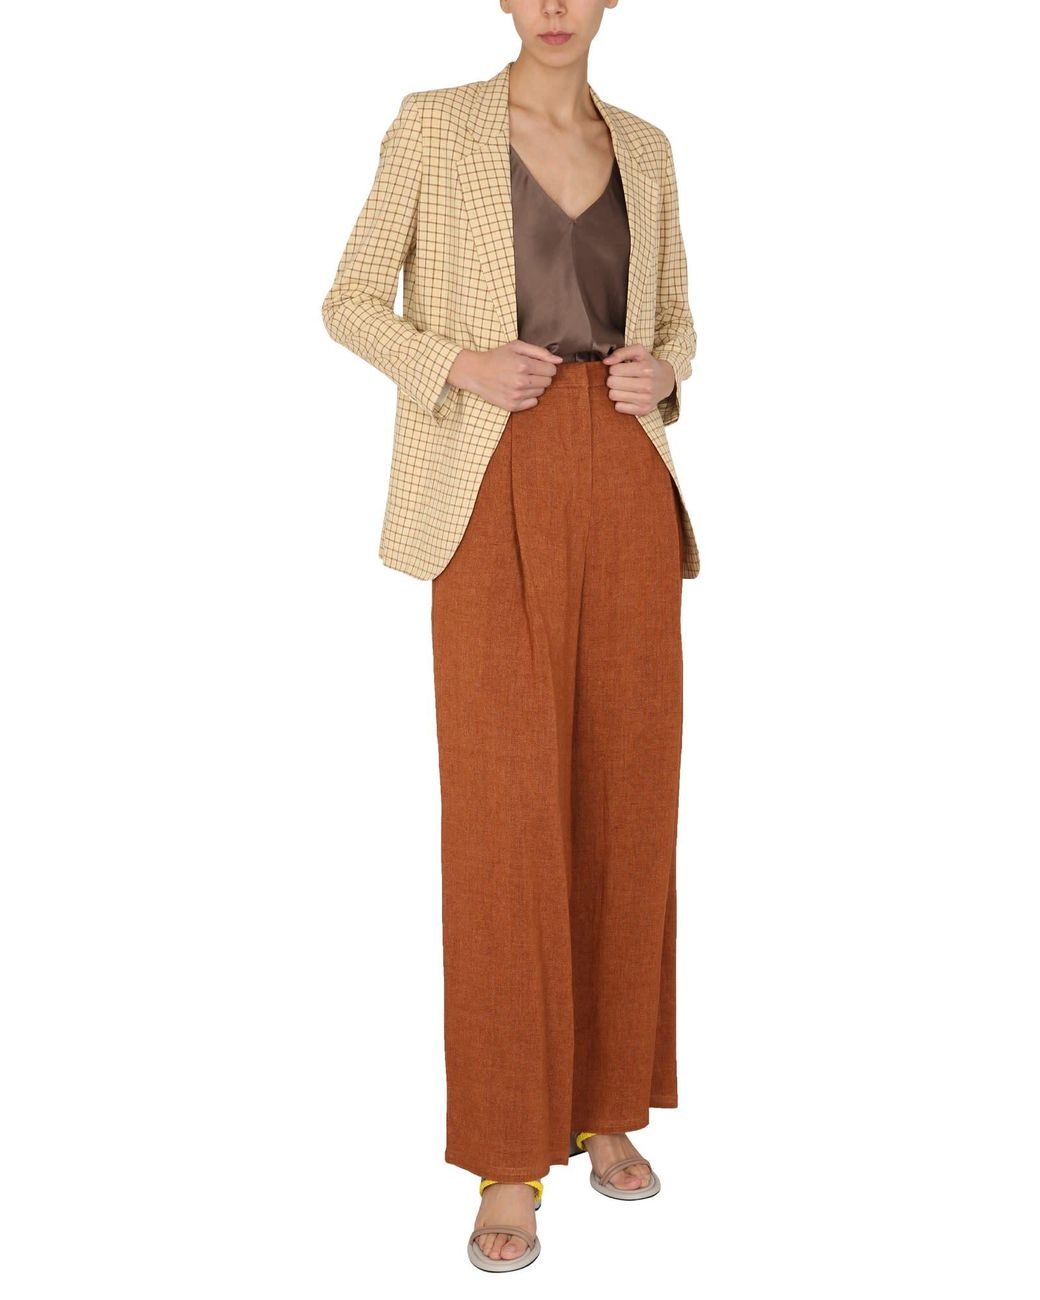 - Save 10% Alysi Synthetic Bourette Blazer in Beige Womens Clothing Jackets Blazers Natural sport coats and suit jackets 